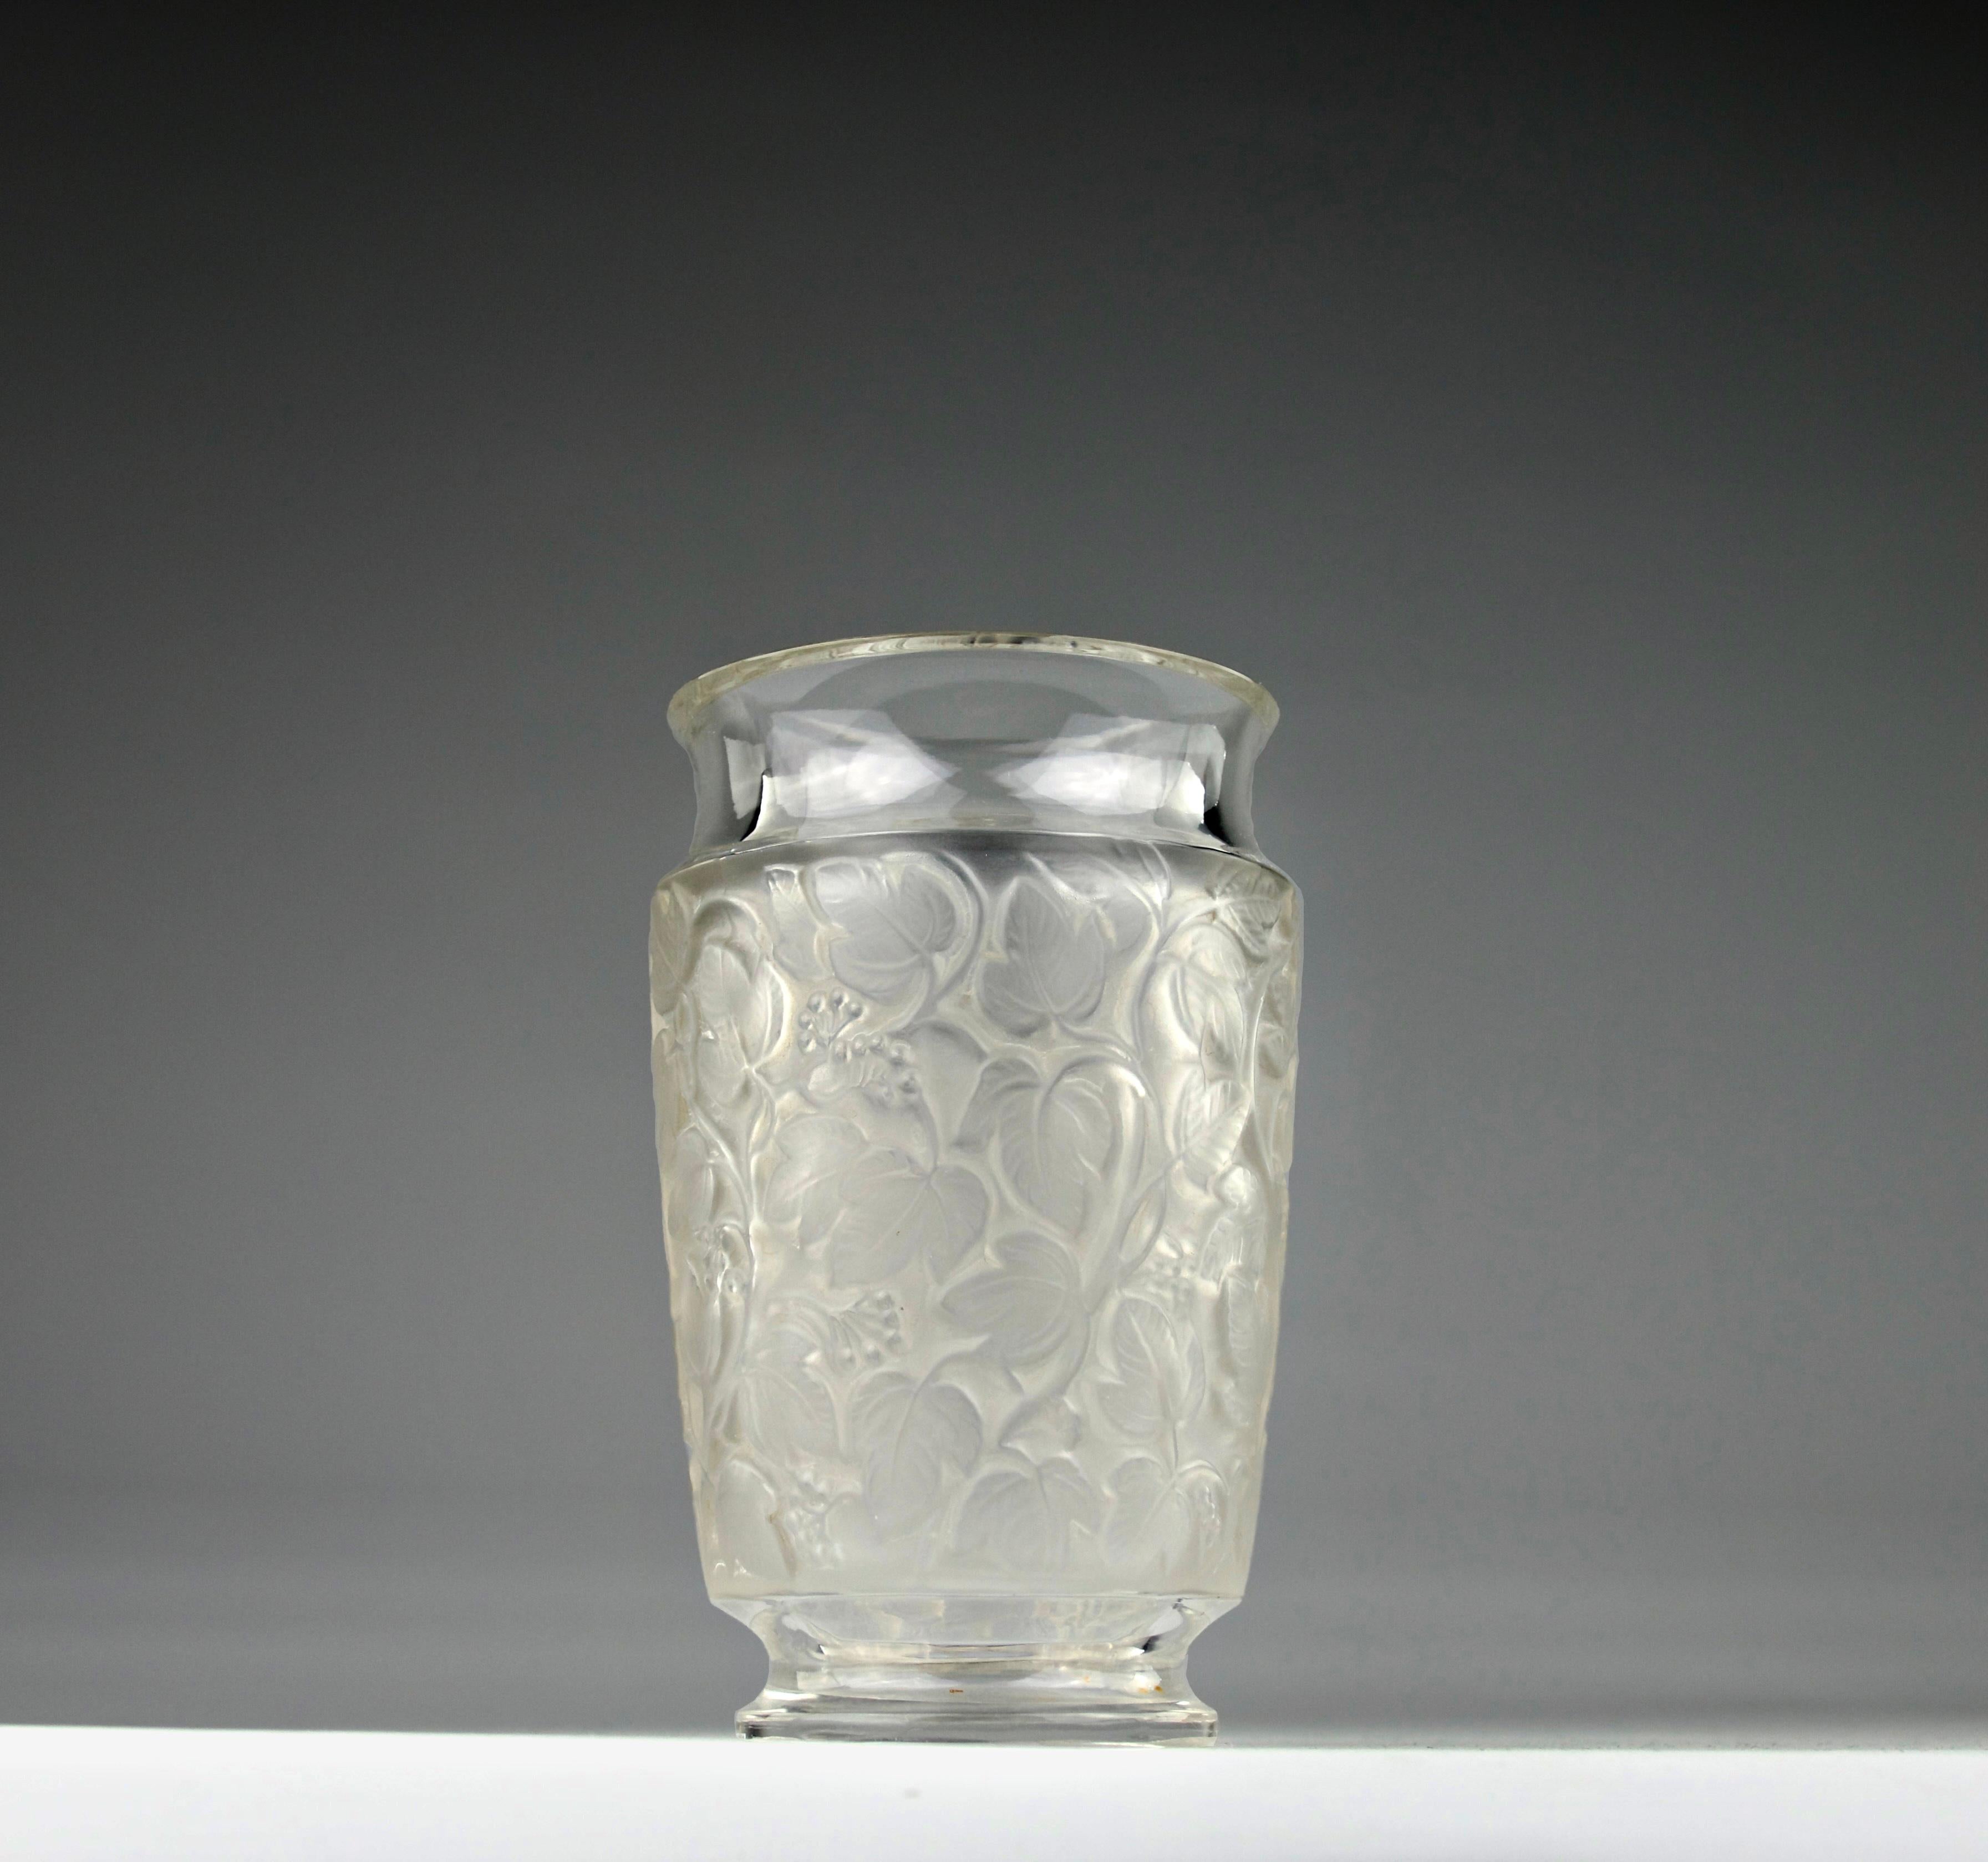 Beautiful Deauville vase created by René Lalique with decorations of oxidised vines. Signed Lalique.

In very good condition. Slight traces of use. Has been recut by a glass master artisan.

Dimensions in cm ( H x D ) : 14.5 x 9

Secure